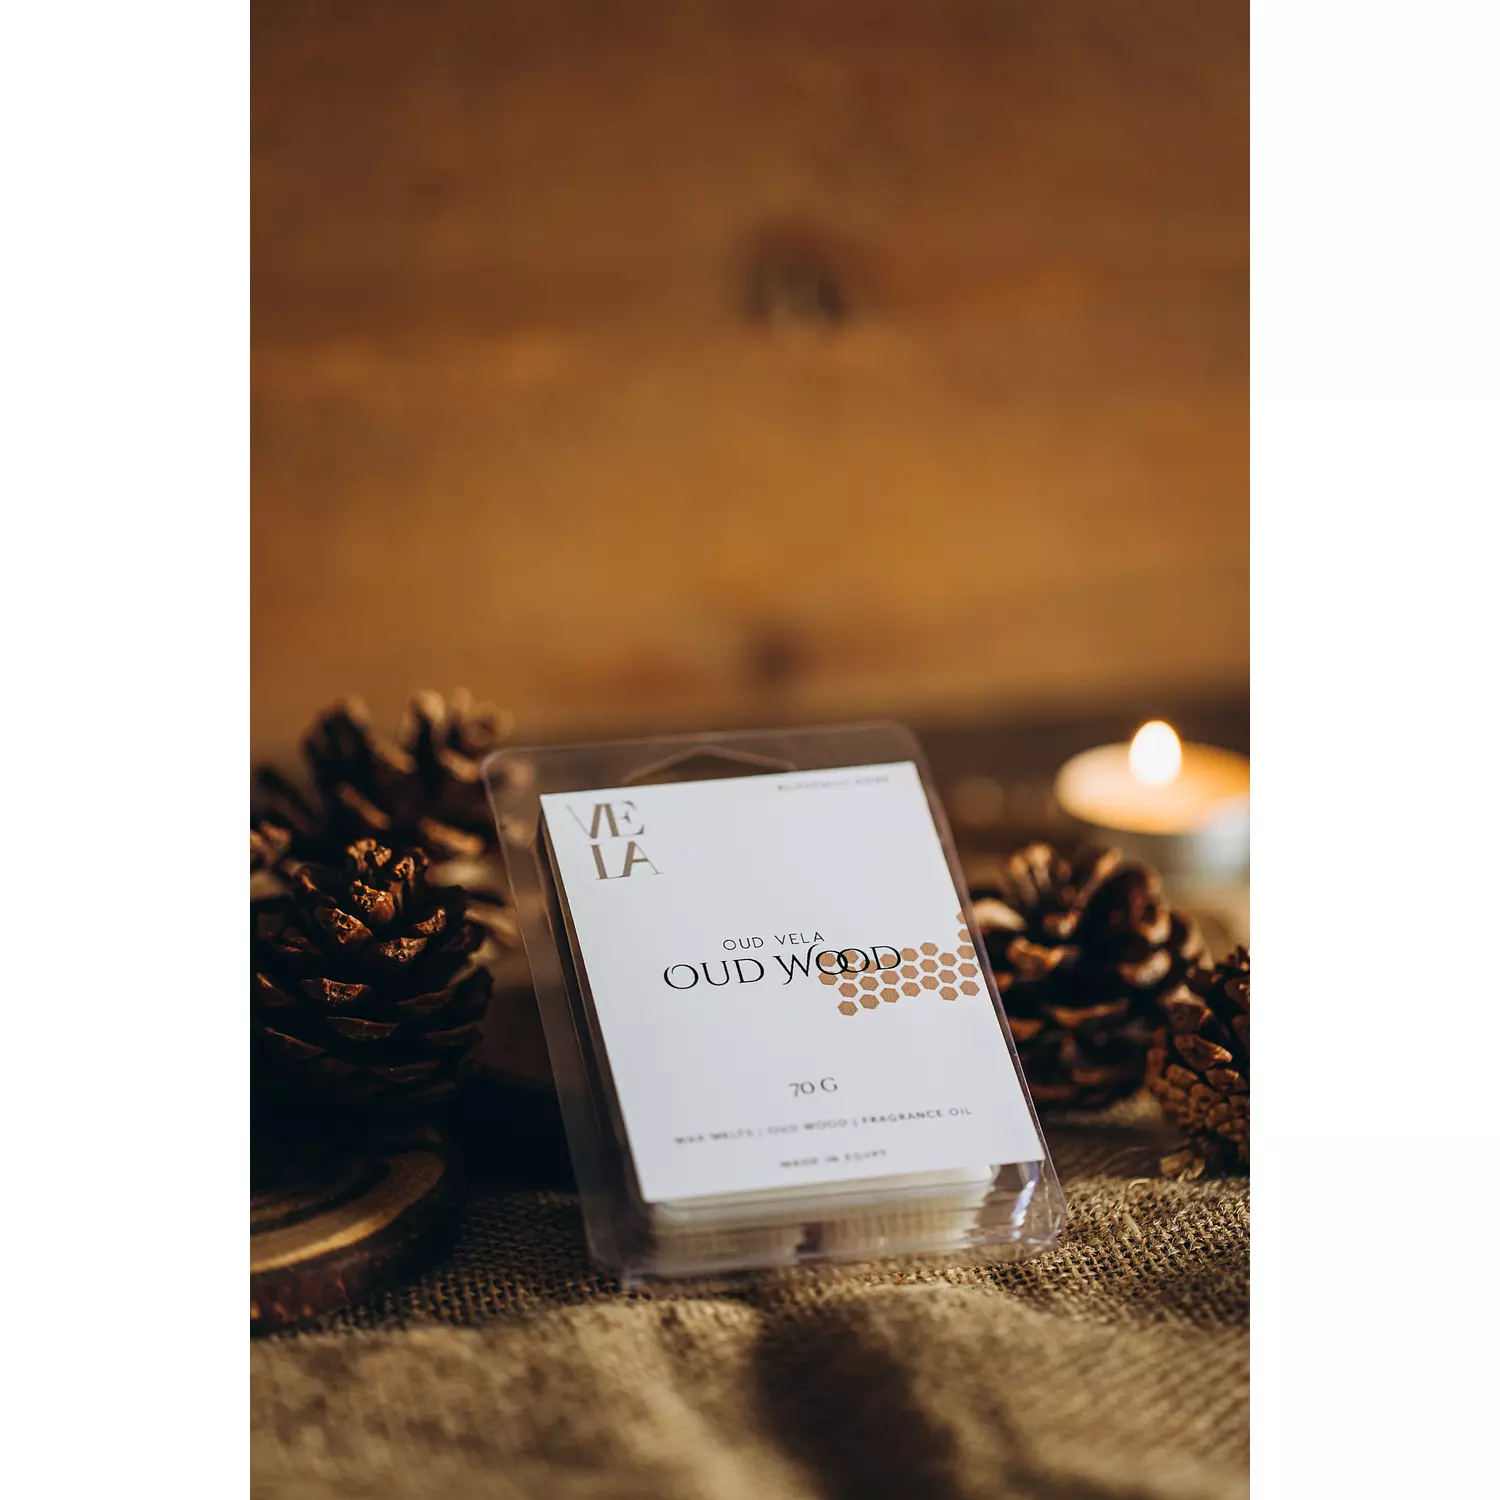 Oud Wood Wax Melts hover image